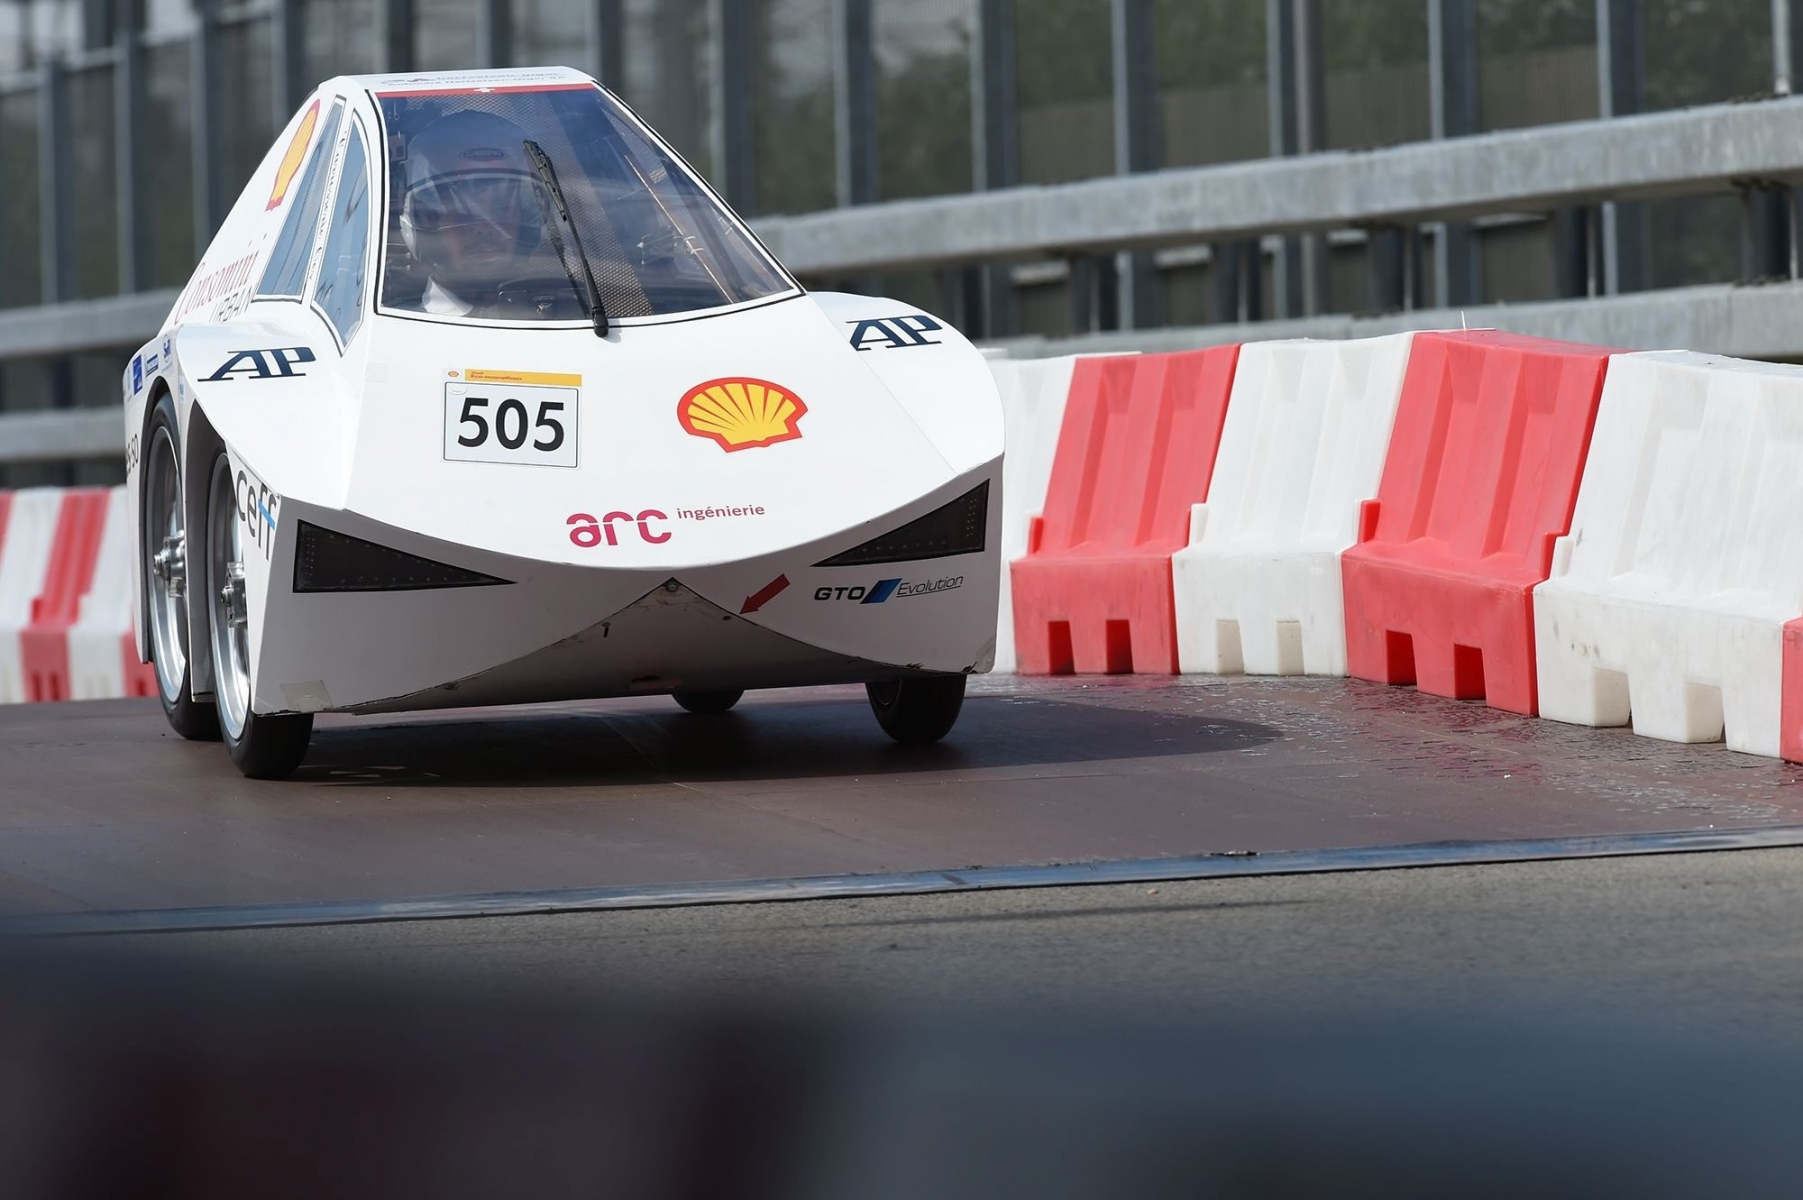 The ConsominiUrban, #505, a ethanol UrbanConcept racing for team Arc Team from HE-Arc Ingénierie, St-Imier, Switzerland, seen on the track during Make the Future London 2016 at Queen Elizabeth Olympic Park, Friday, July 1, 2016 in London, UK. (Mark Pain for Shell) Make The Future London 2016